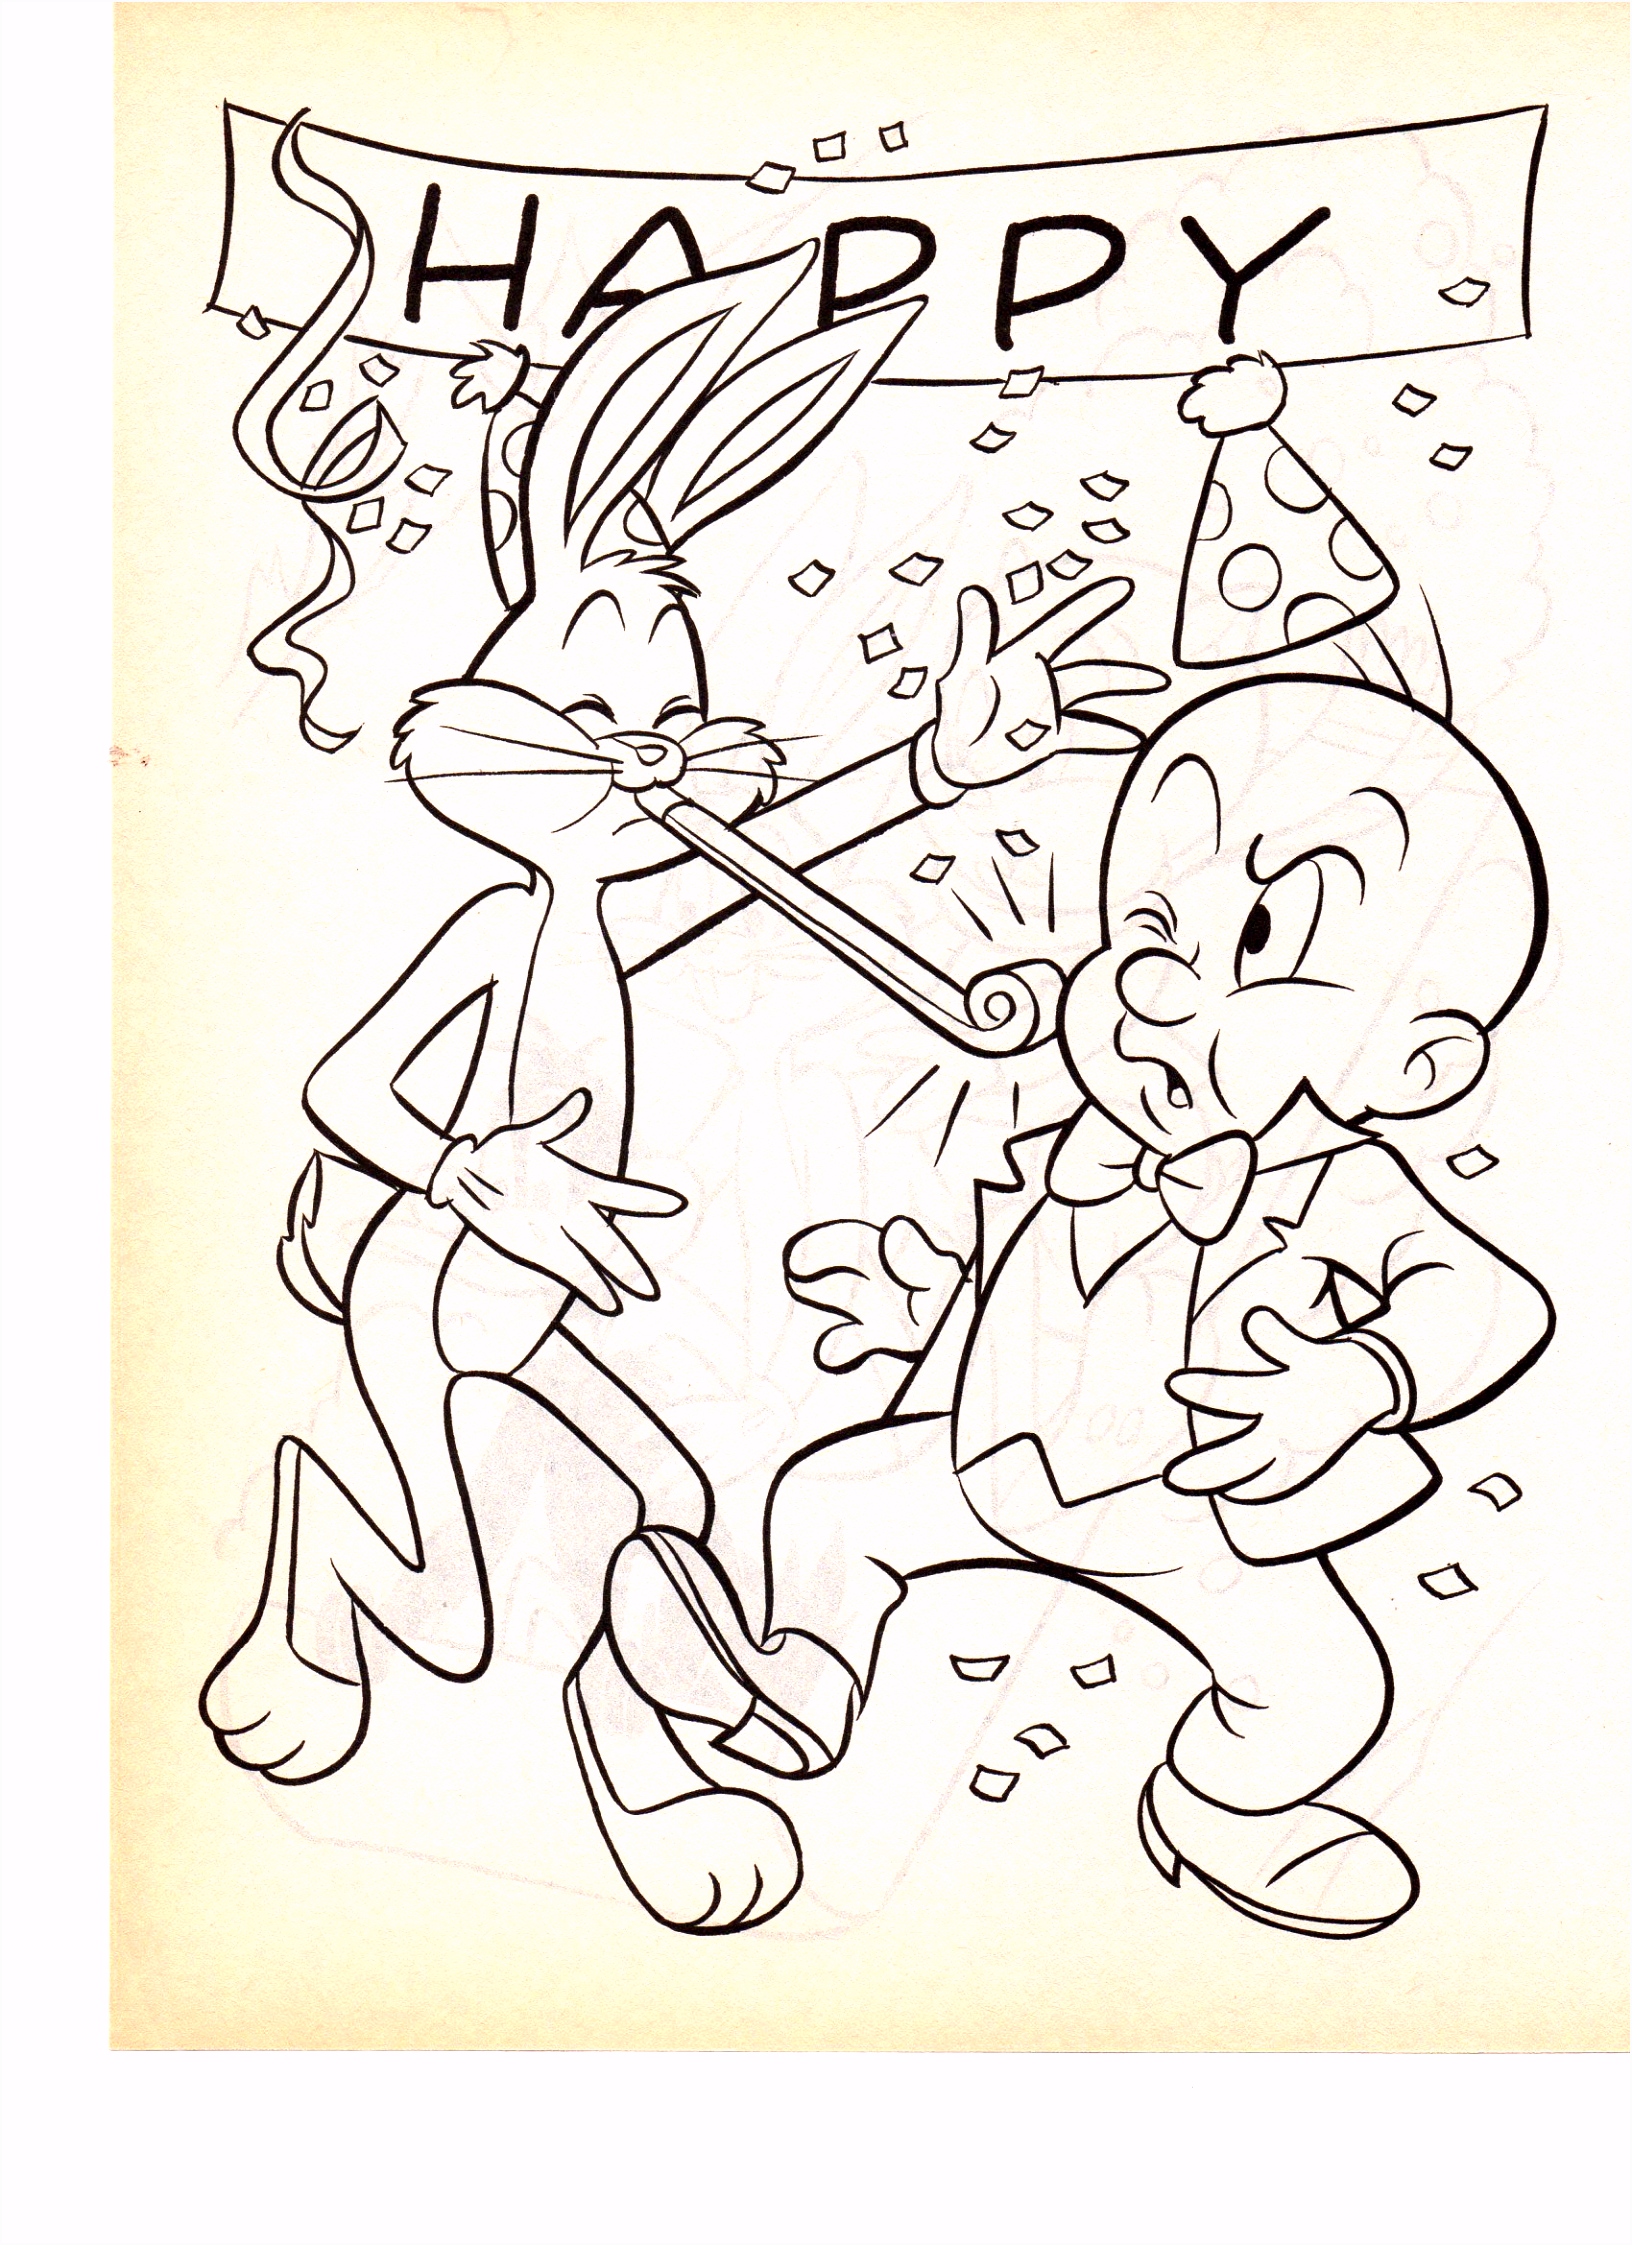 LOONEY TUNES BUGS BUNNY N ELMER FUDD COLORING PAGES